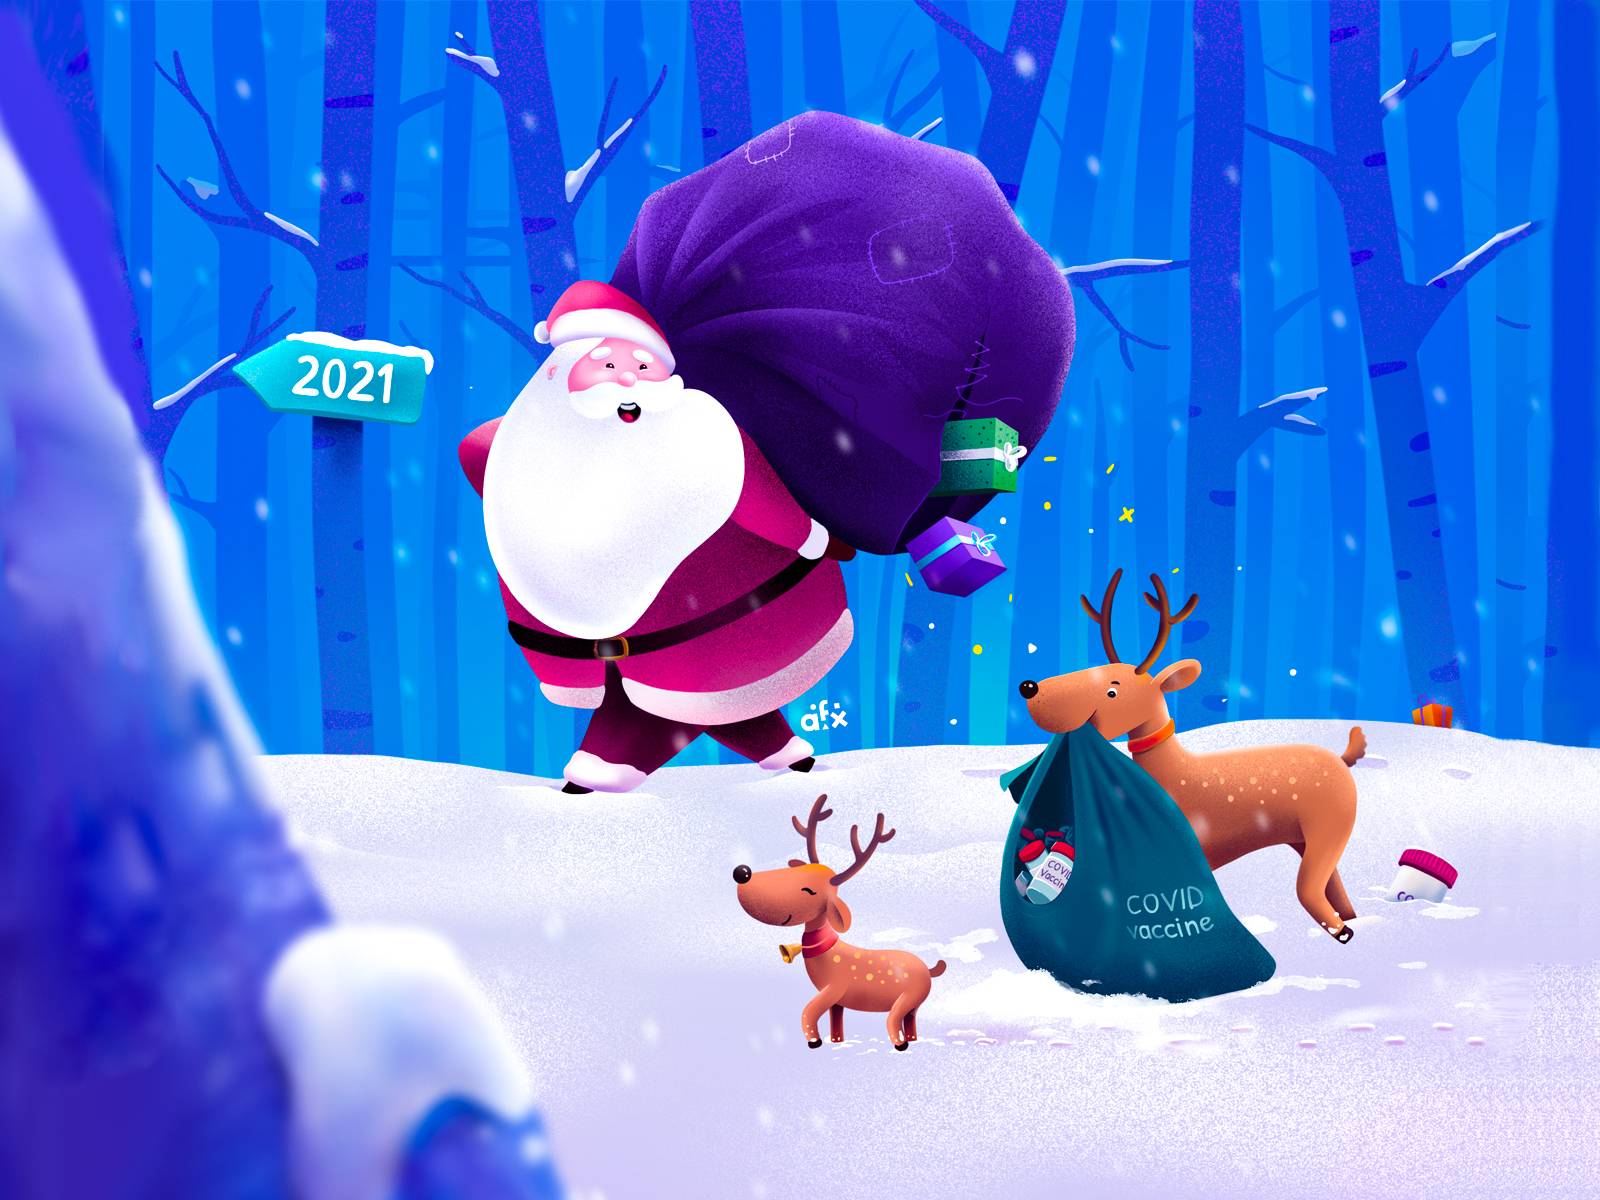 Merry Christmas 🎄 & a healthy New year ⭐️ 2020 2021 character christmas cute december festive gifts happy hope illustration procreate reindeer santa santaclaus snow